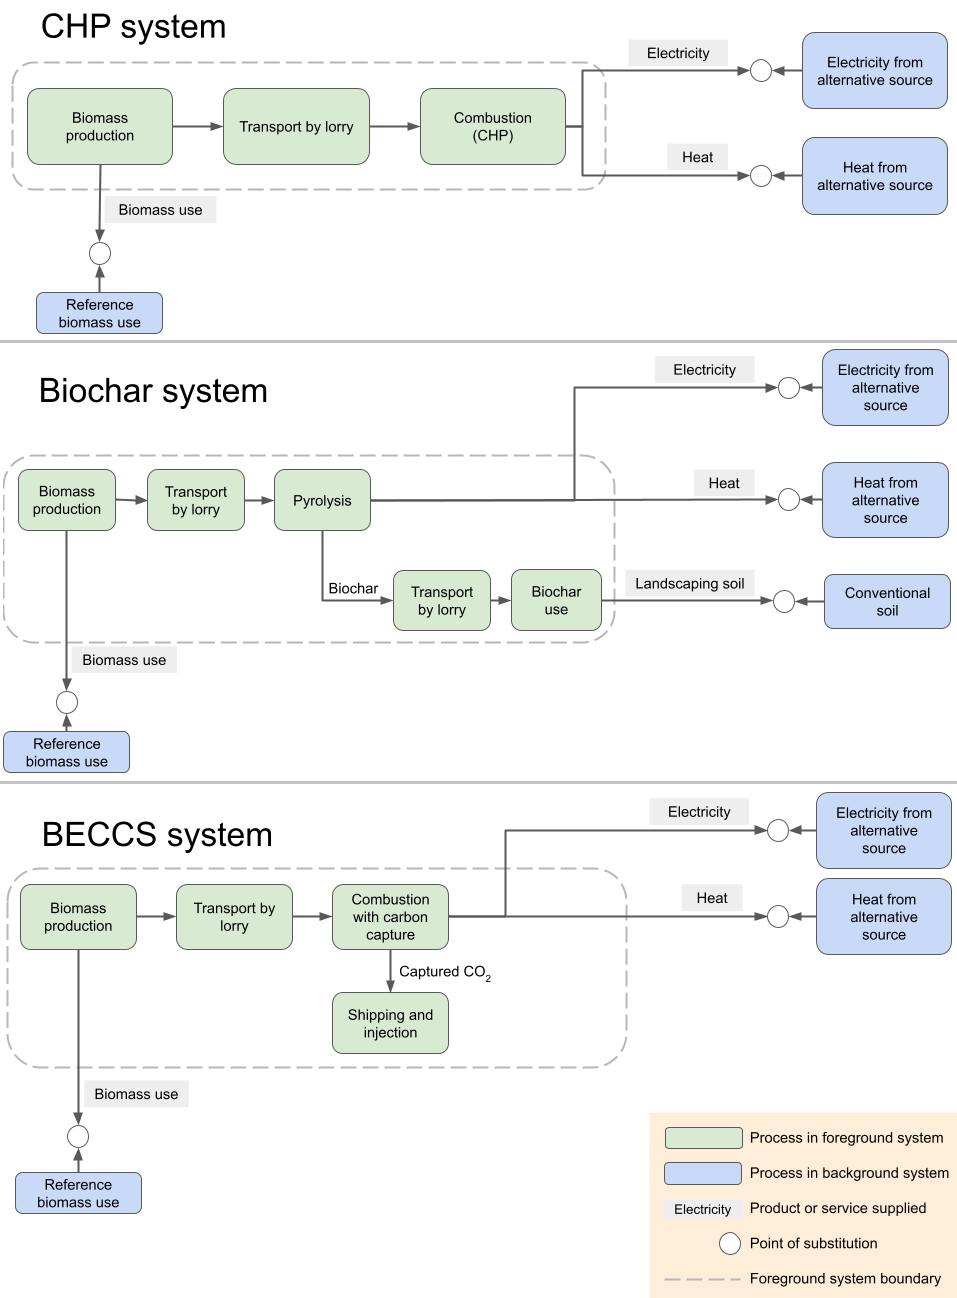 Bioenergy with or without CDR?